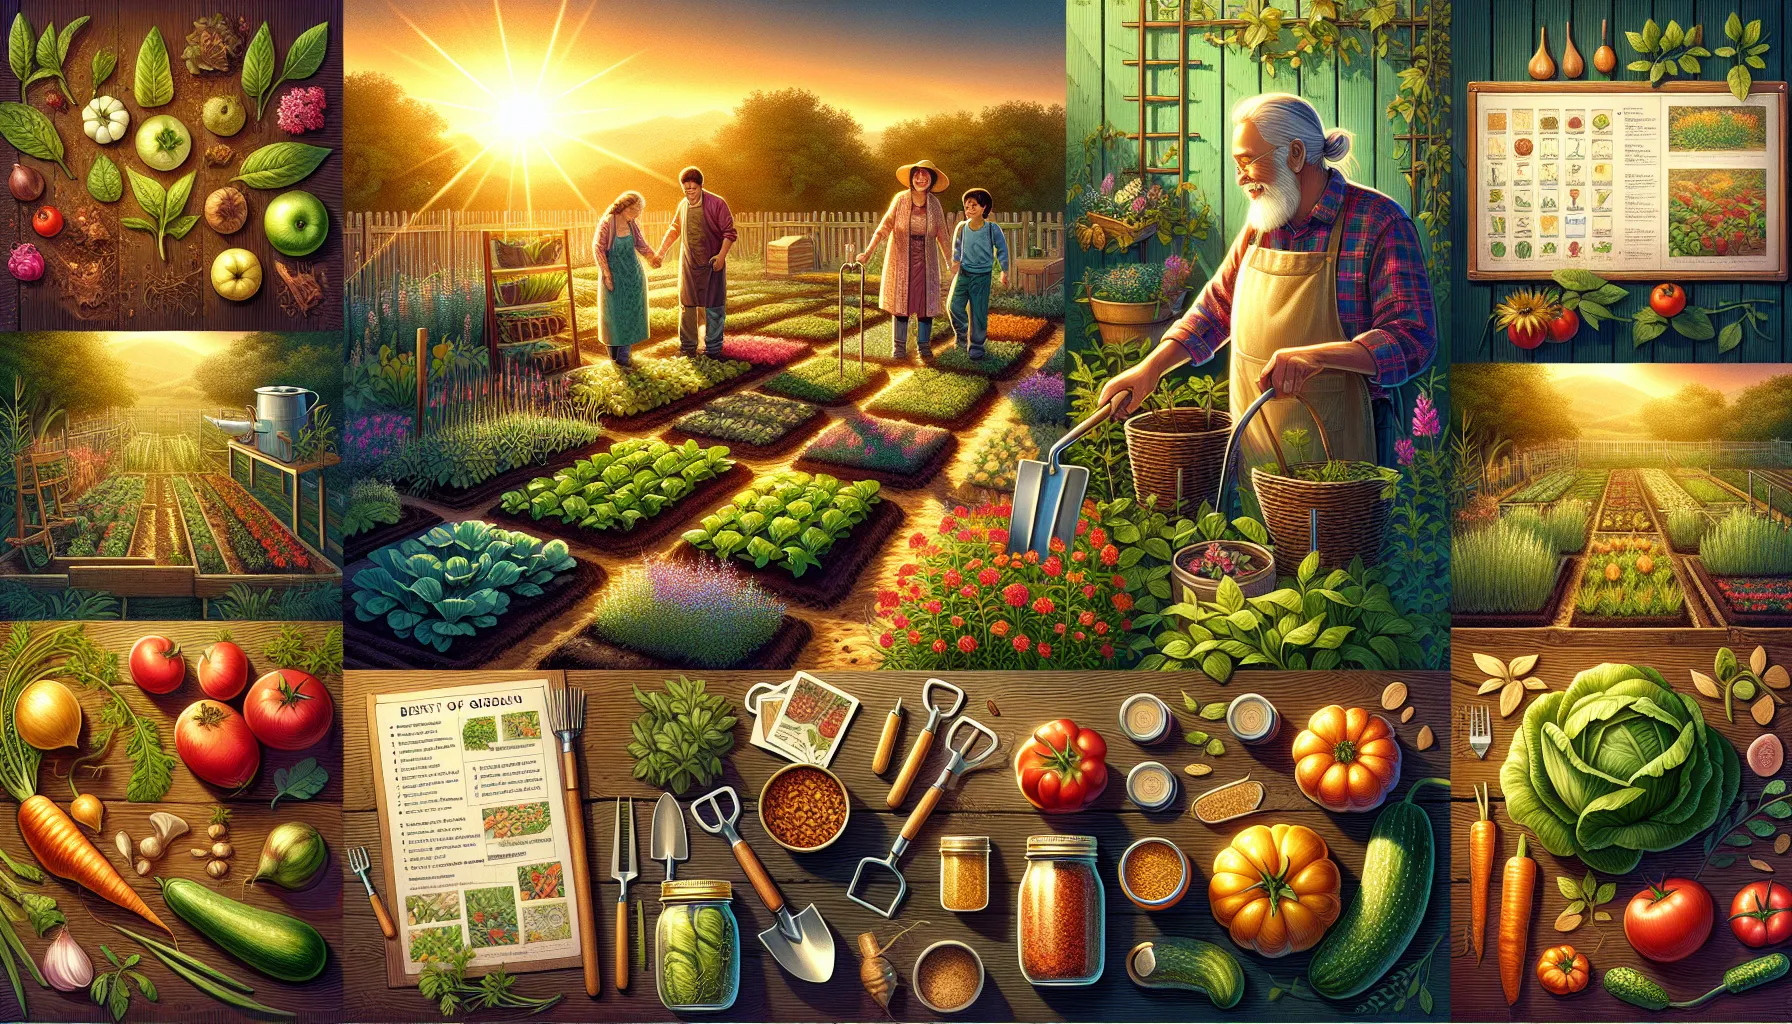 Lush veggie garden montage depicting vibrant vegetables, happy gardeners at work, and gardening tools, highlighted by a warm sunrise.